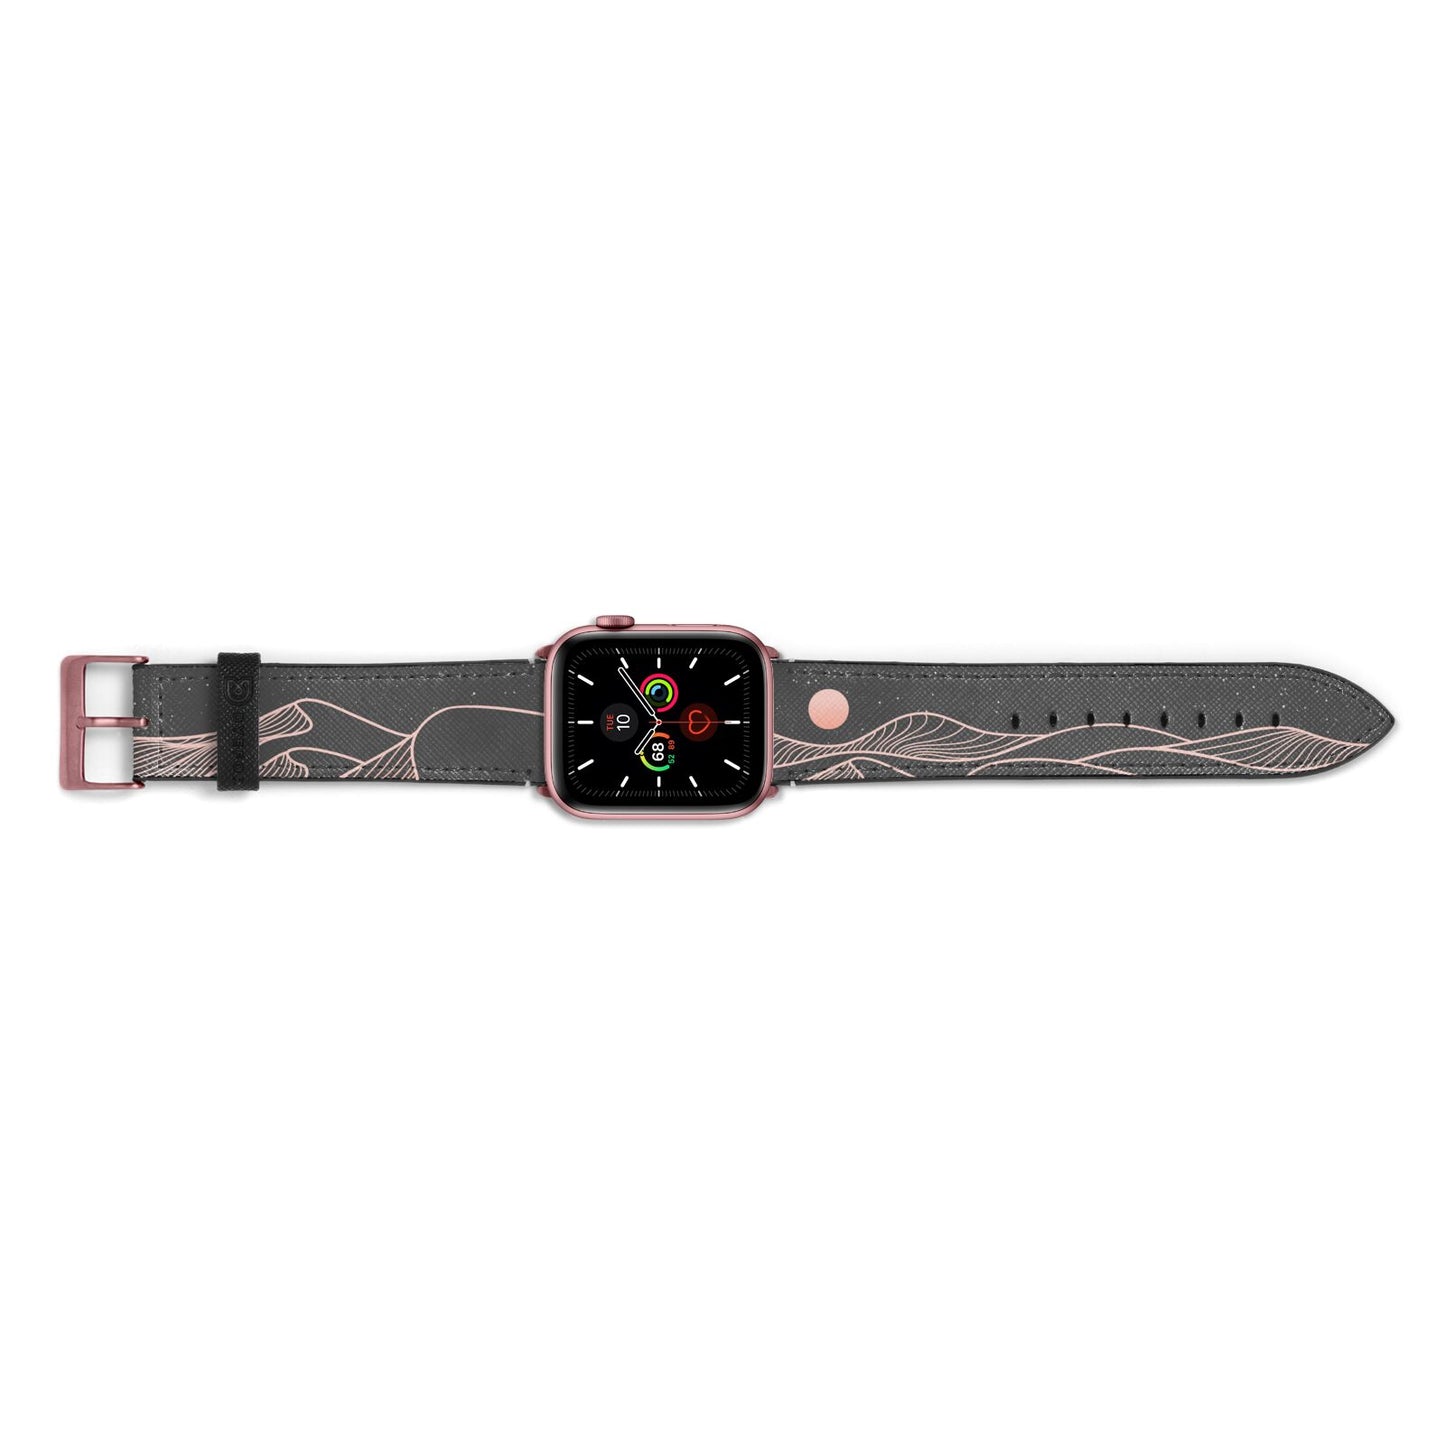 Abstract Sunset Apple Watch Strap Landscape Image Rose Gold Hardware